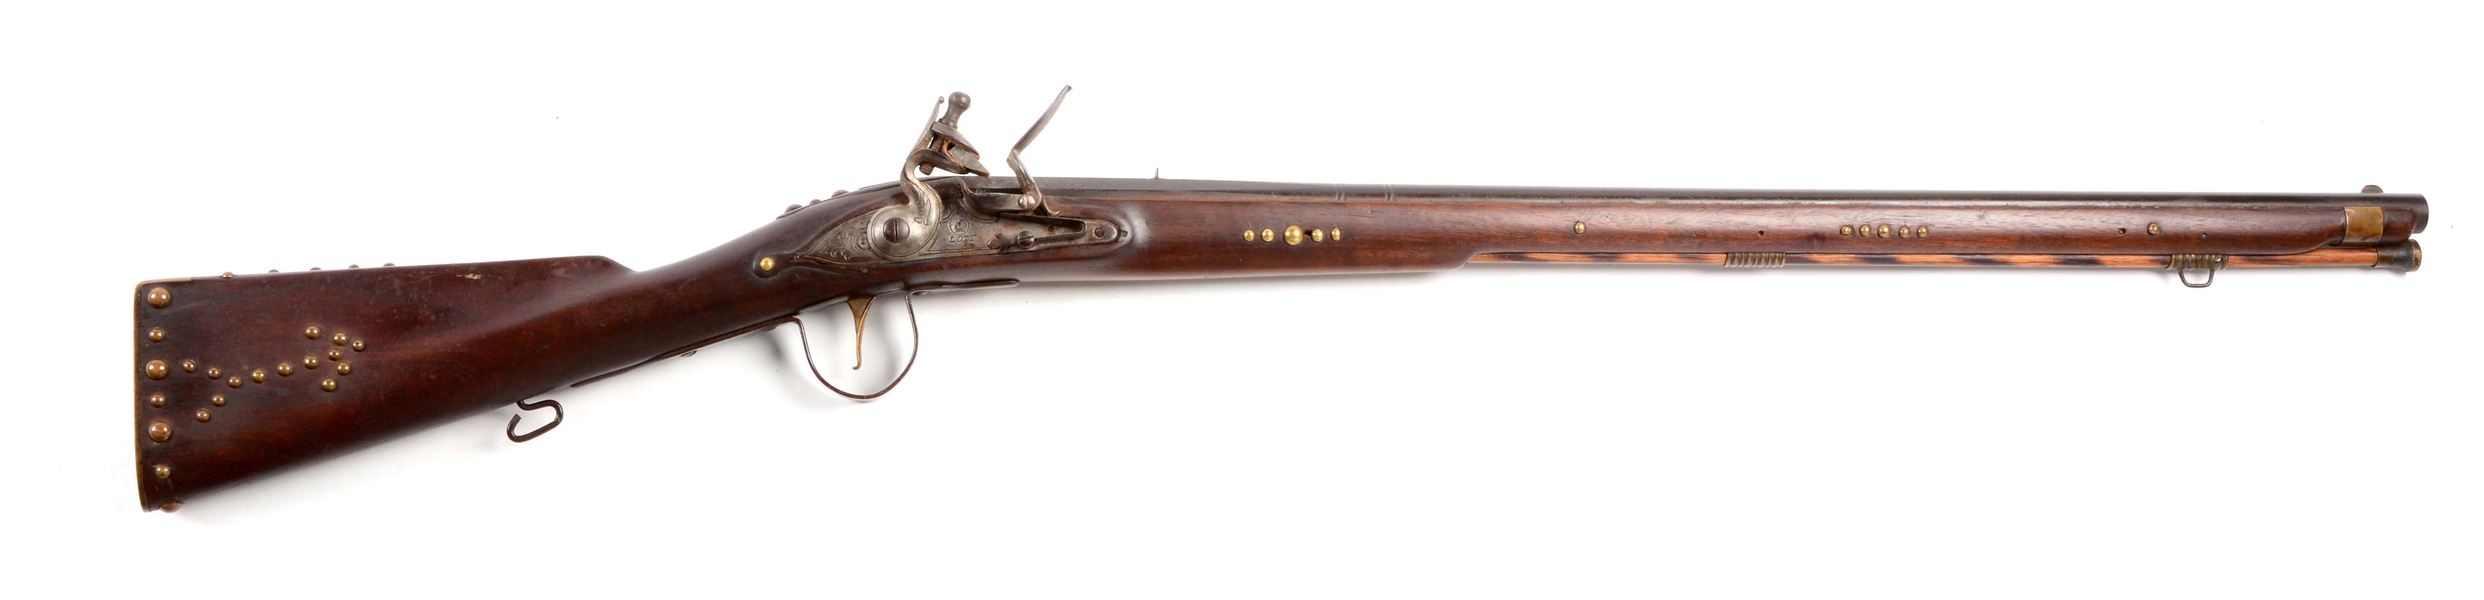 (A) CONTEMPORARY NORTHWEST TRADE MUSKET.